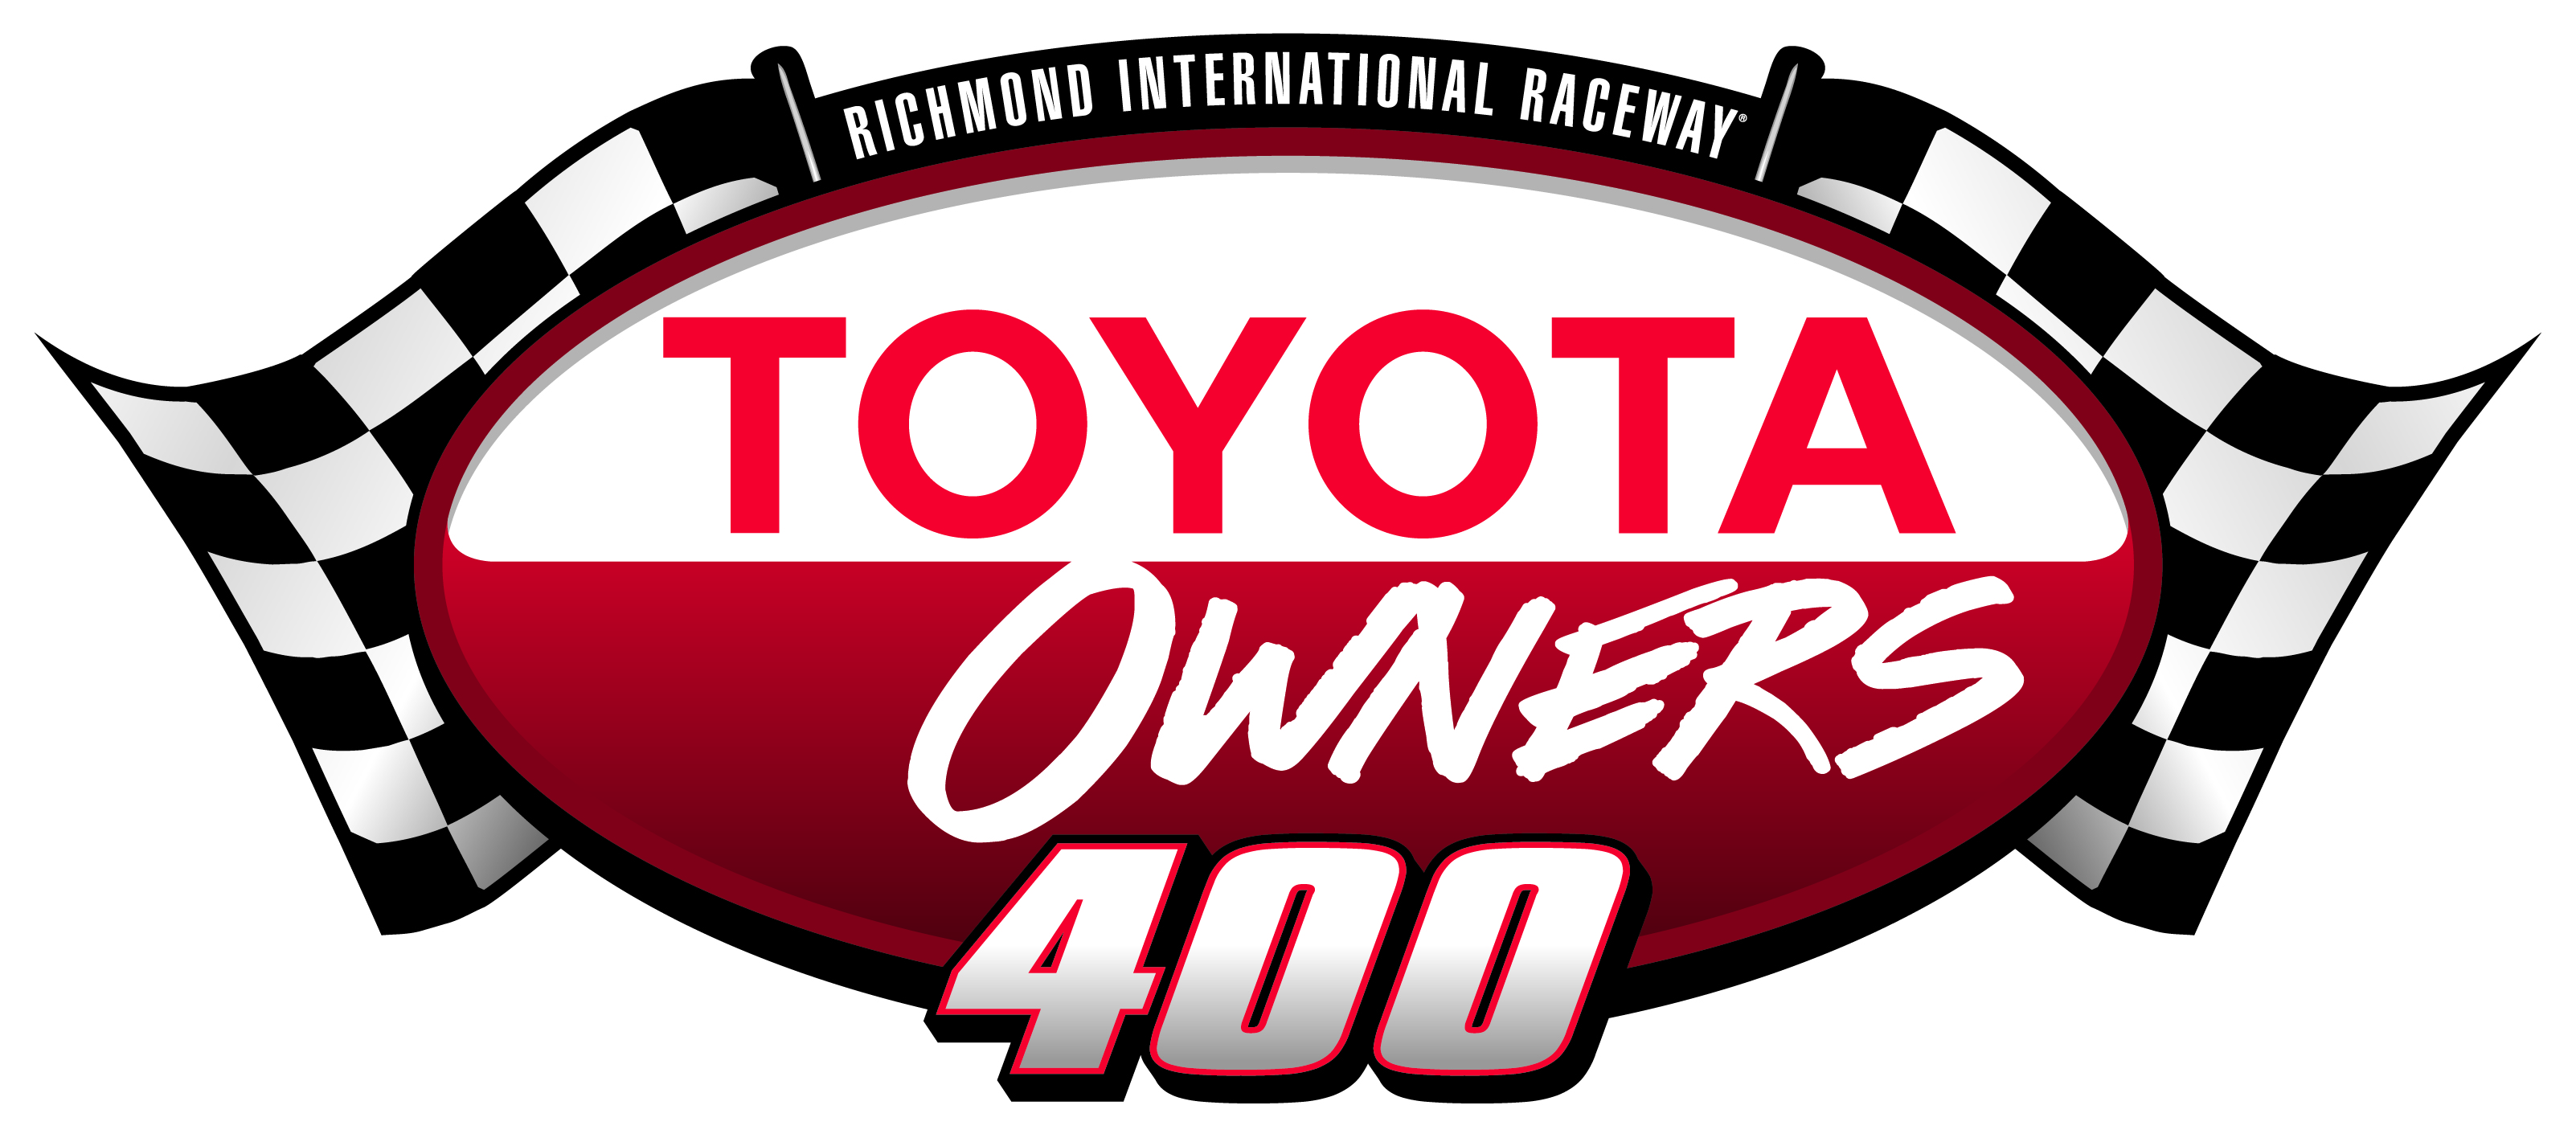 NASCAR at Richmond: Starting Lineup, green flag start time and tv info for Toyota Owners 400